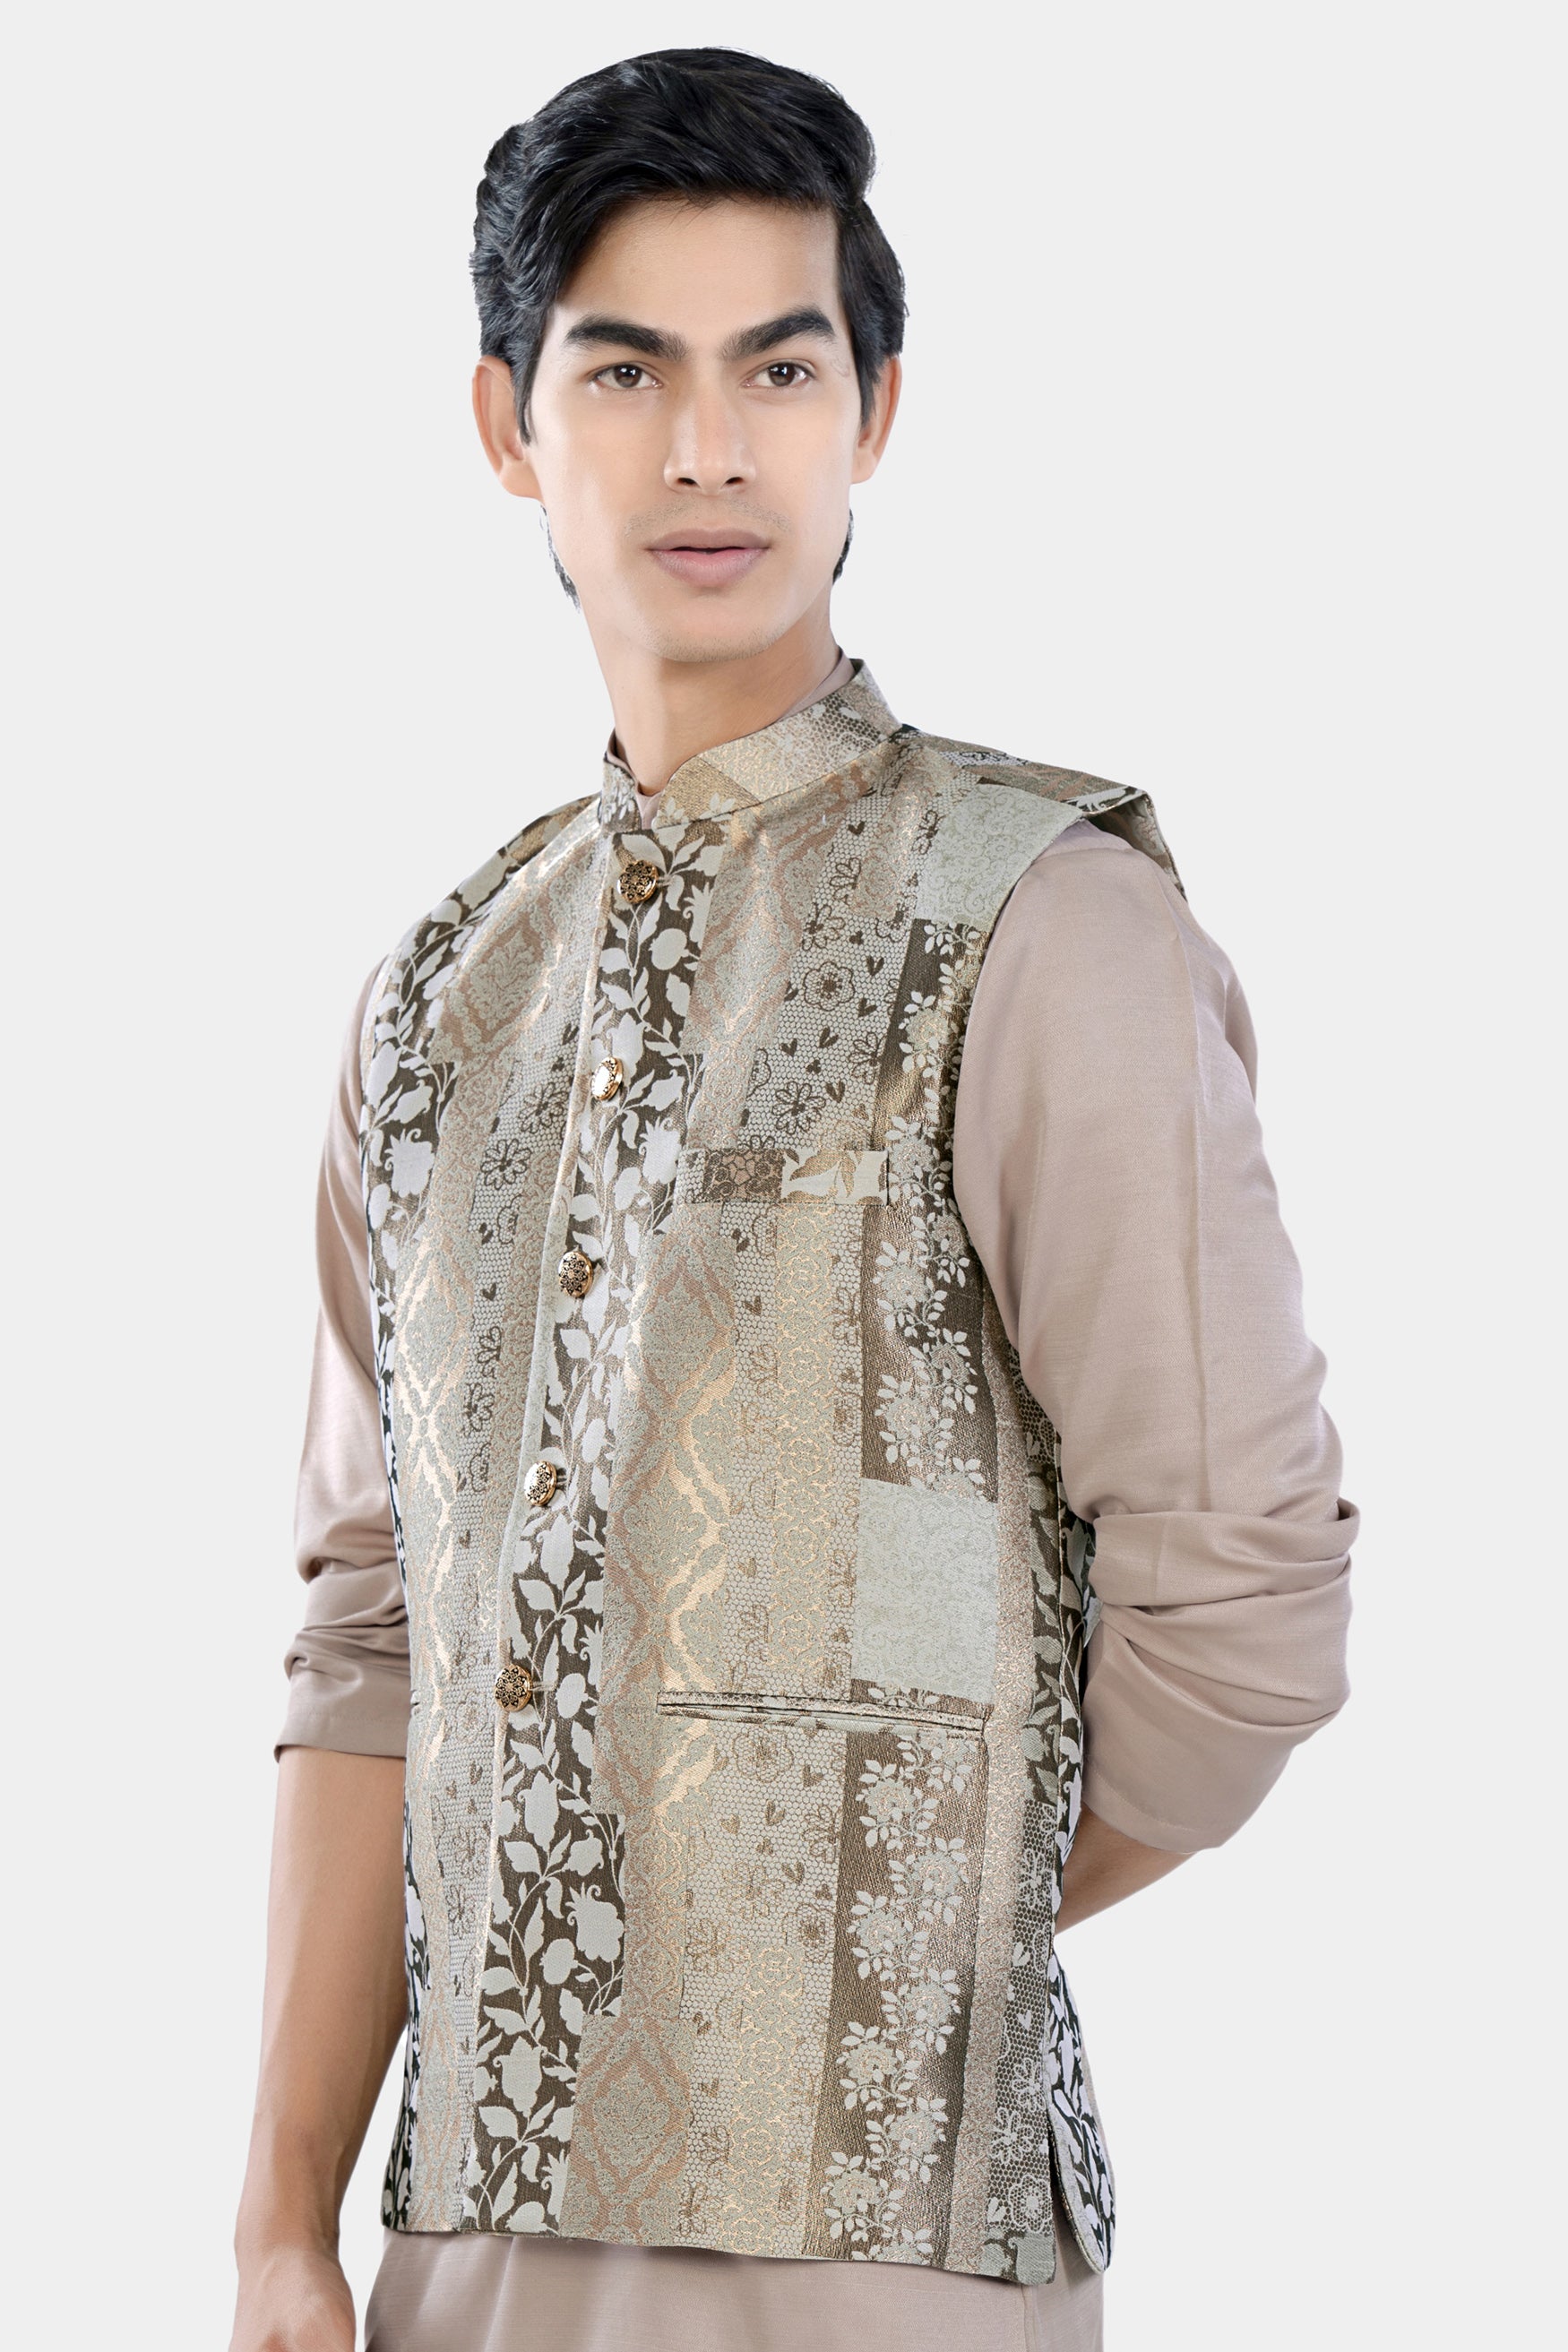 Nomad and Armadillo Brown Geometric Jacquard Textured Designer Nehru Jacket WC3478-36,  WC3478-38,  WC3478-40,  WC3478-42,  WC3478-44,  WC3478-46,  WC3478-48,  WC3478-50,  WC3478-52,  WC3478-54,  WC3478-56,  WC3478-58,  WC3478-60